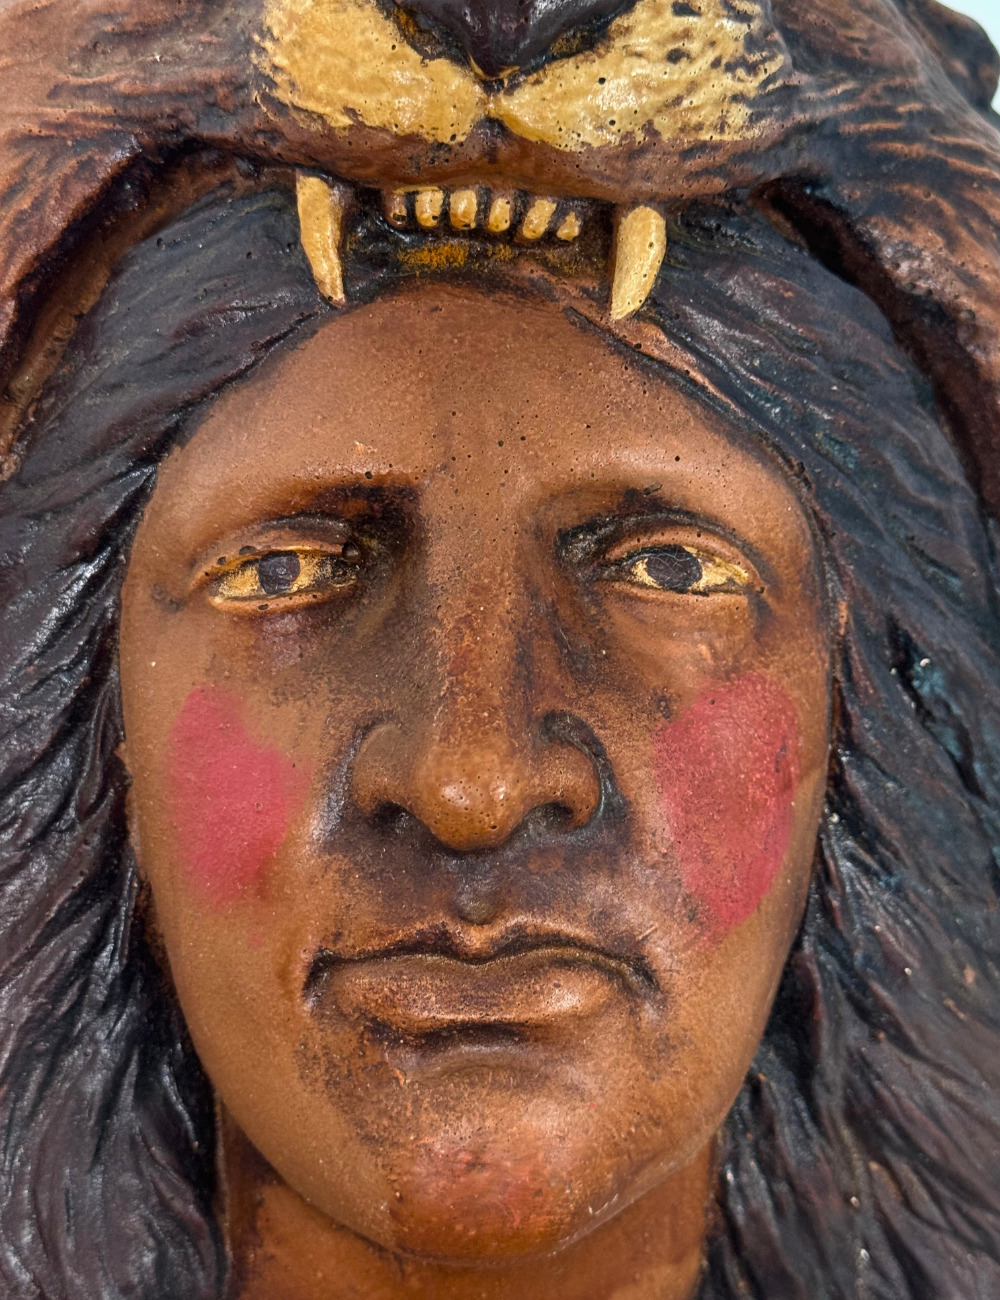 VINTAGE CHALKWARE NATIVE AMERICAN INDIAN CHIEF TOBACCO STORE WALL BUST - 1930's